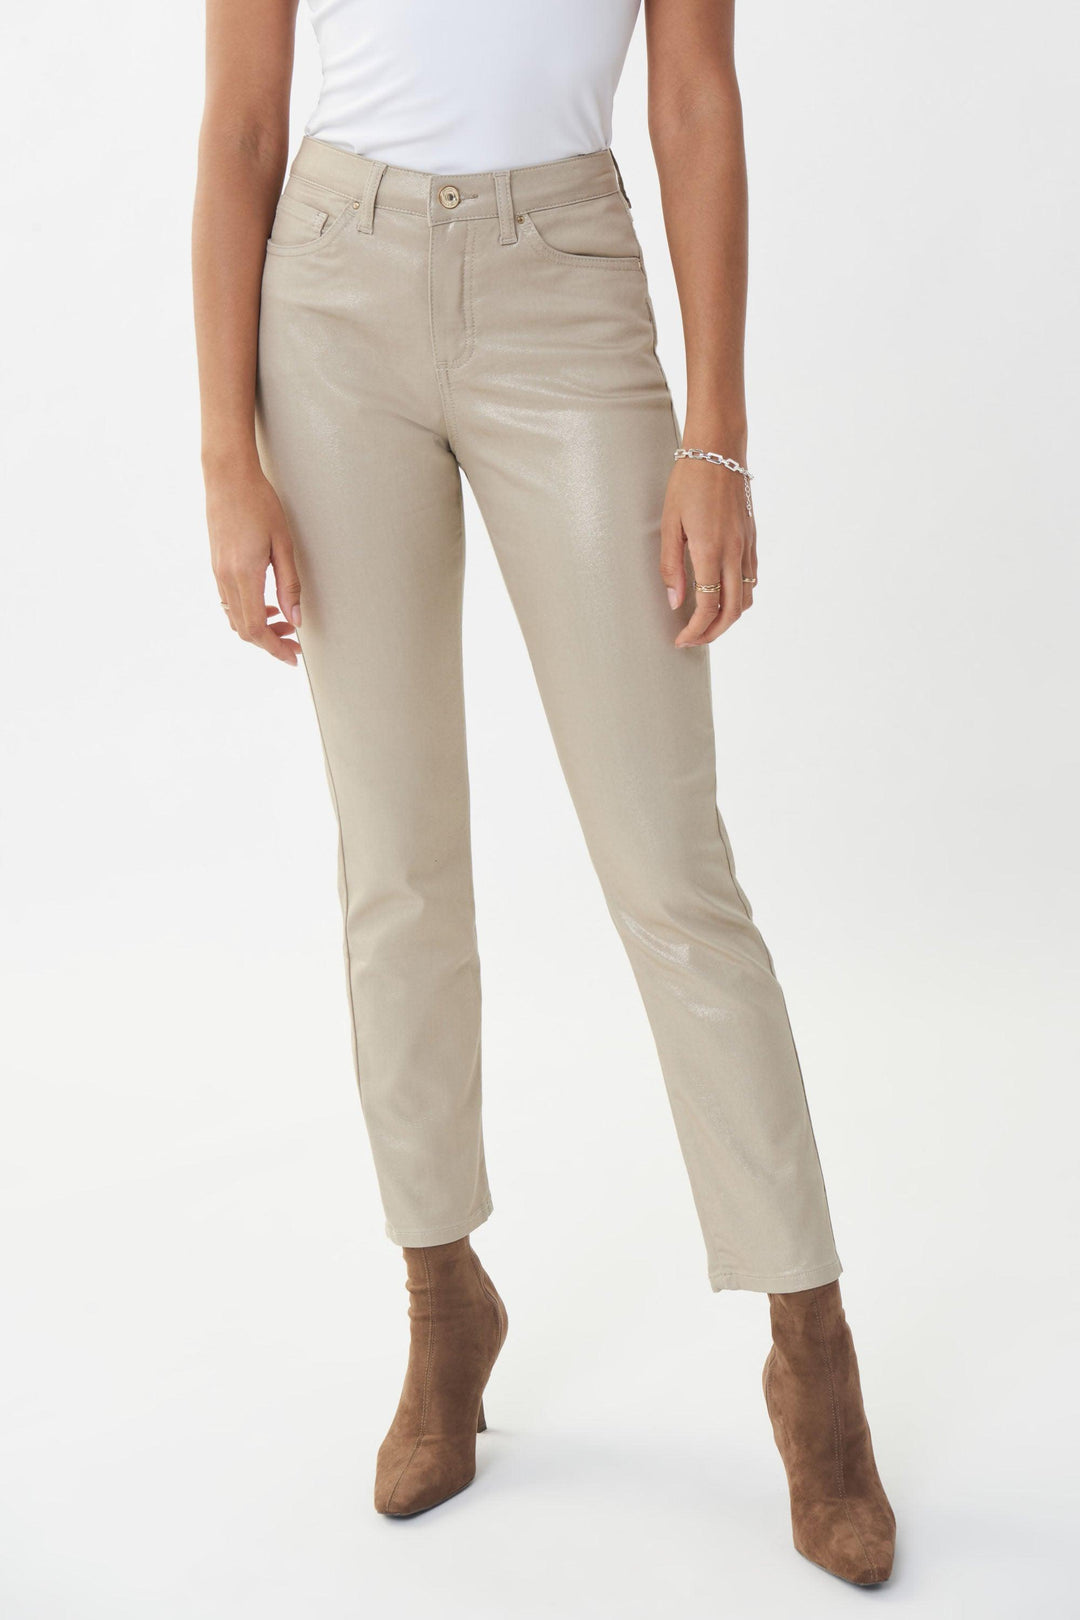 Joseph Ribkoff Champagne Trouser Style 223929 - Jeans AW22, Beige, Champagne, New, Trouser ginasmartboutique